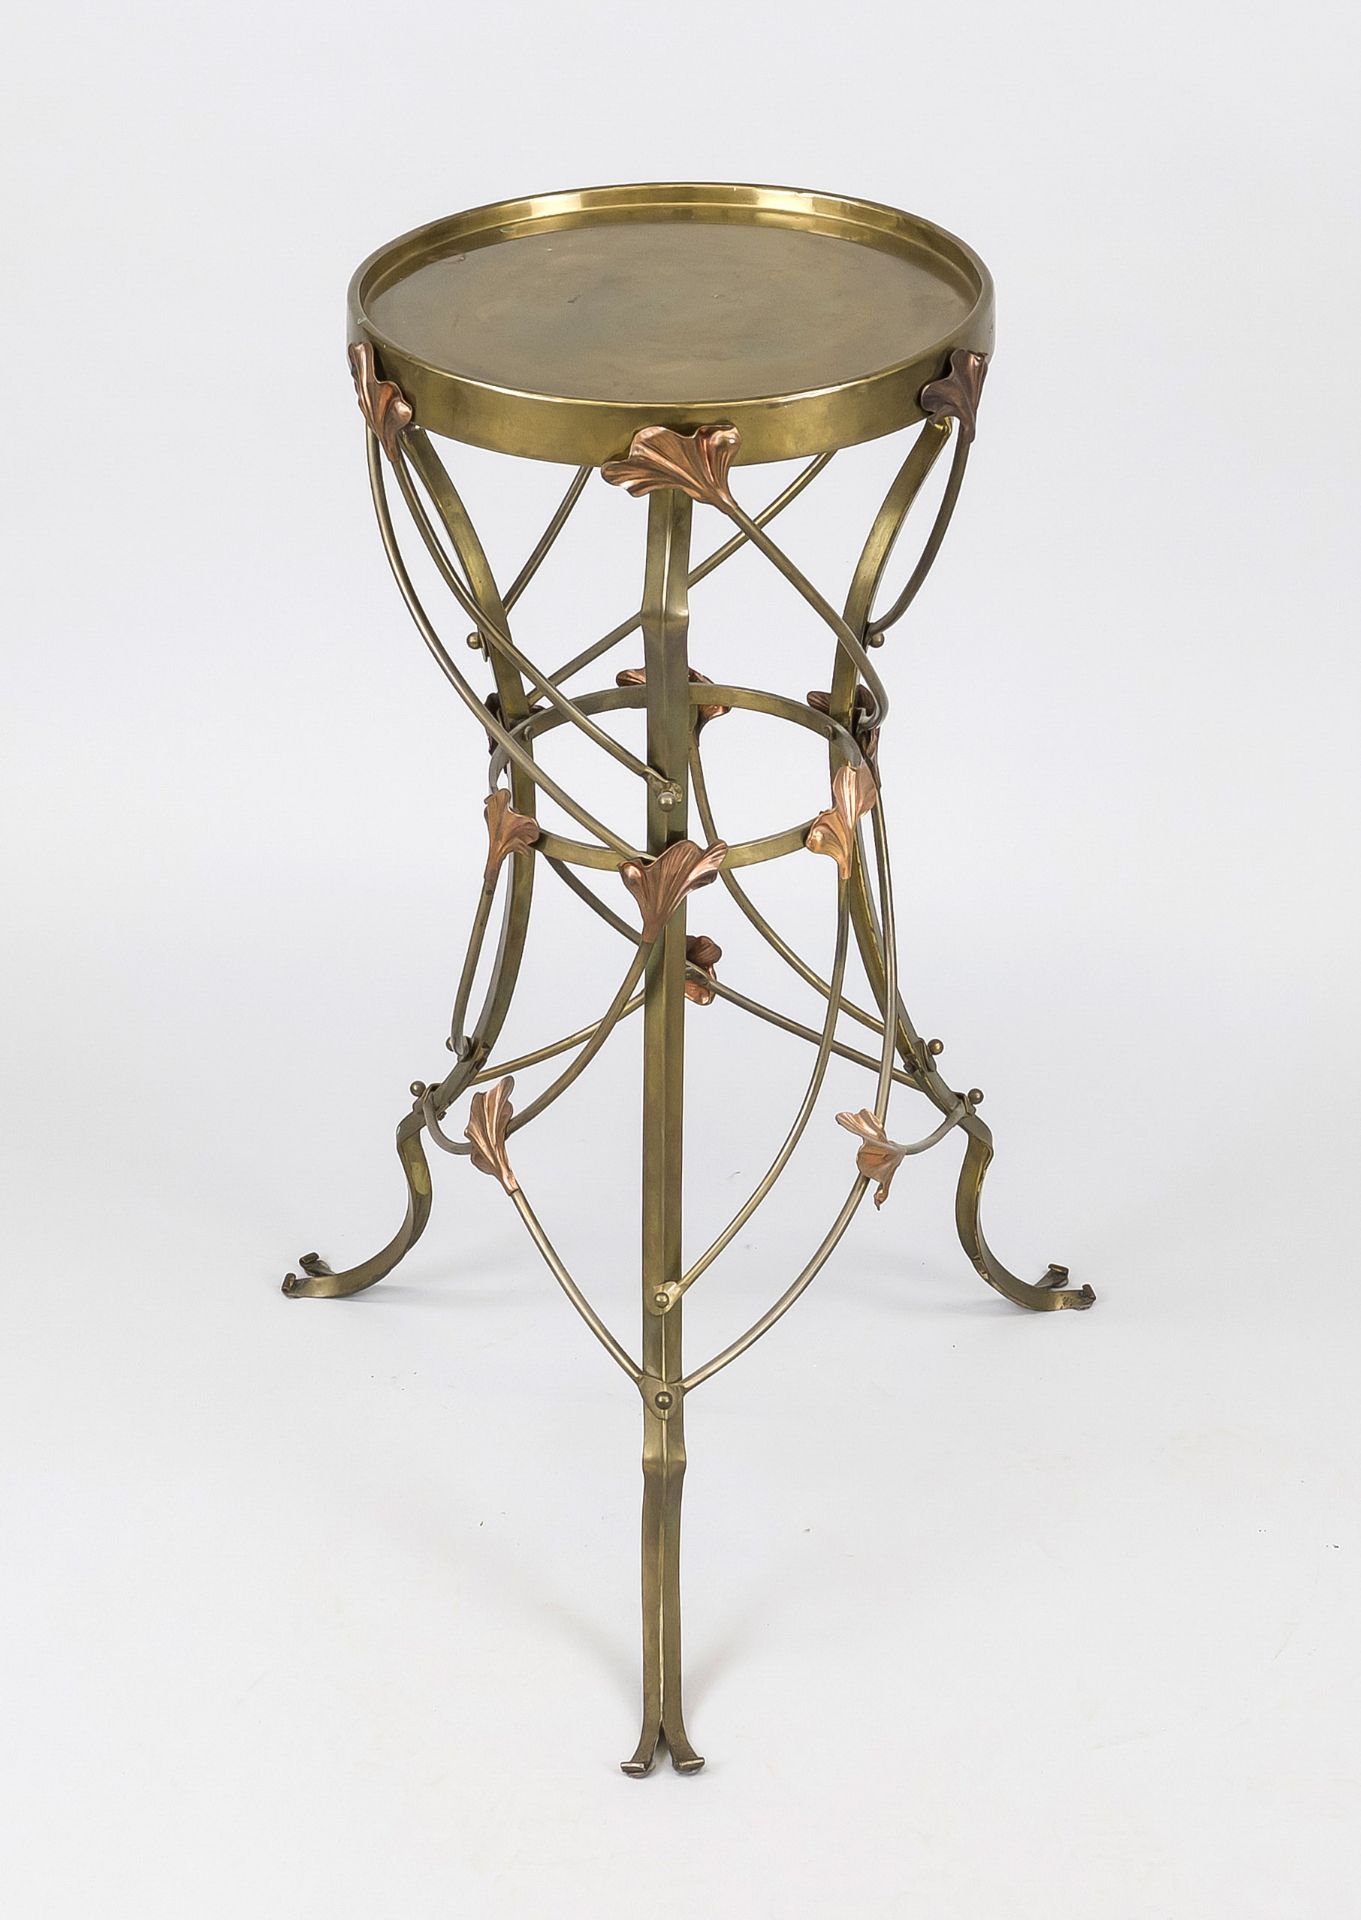 Art Nouveau plant table, c. 1900, brass and copper. Tripod base with leafy tendril. Round top,